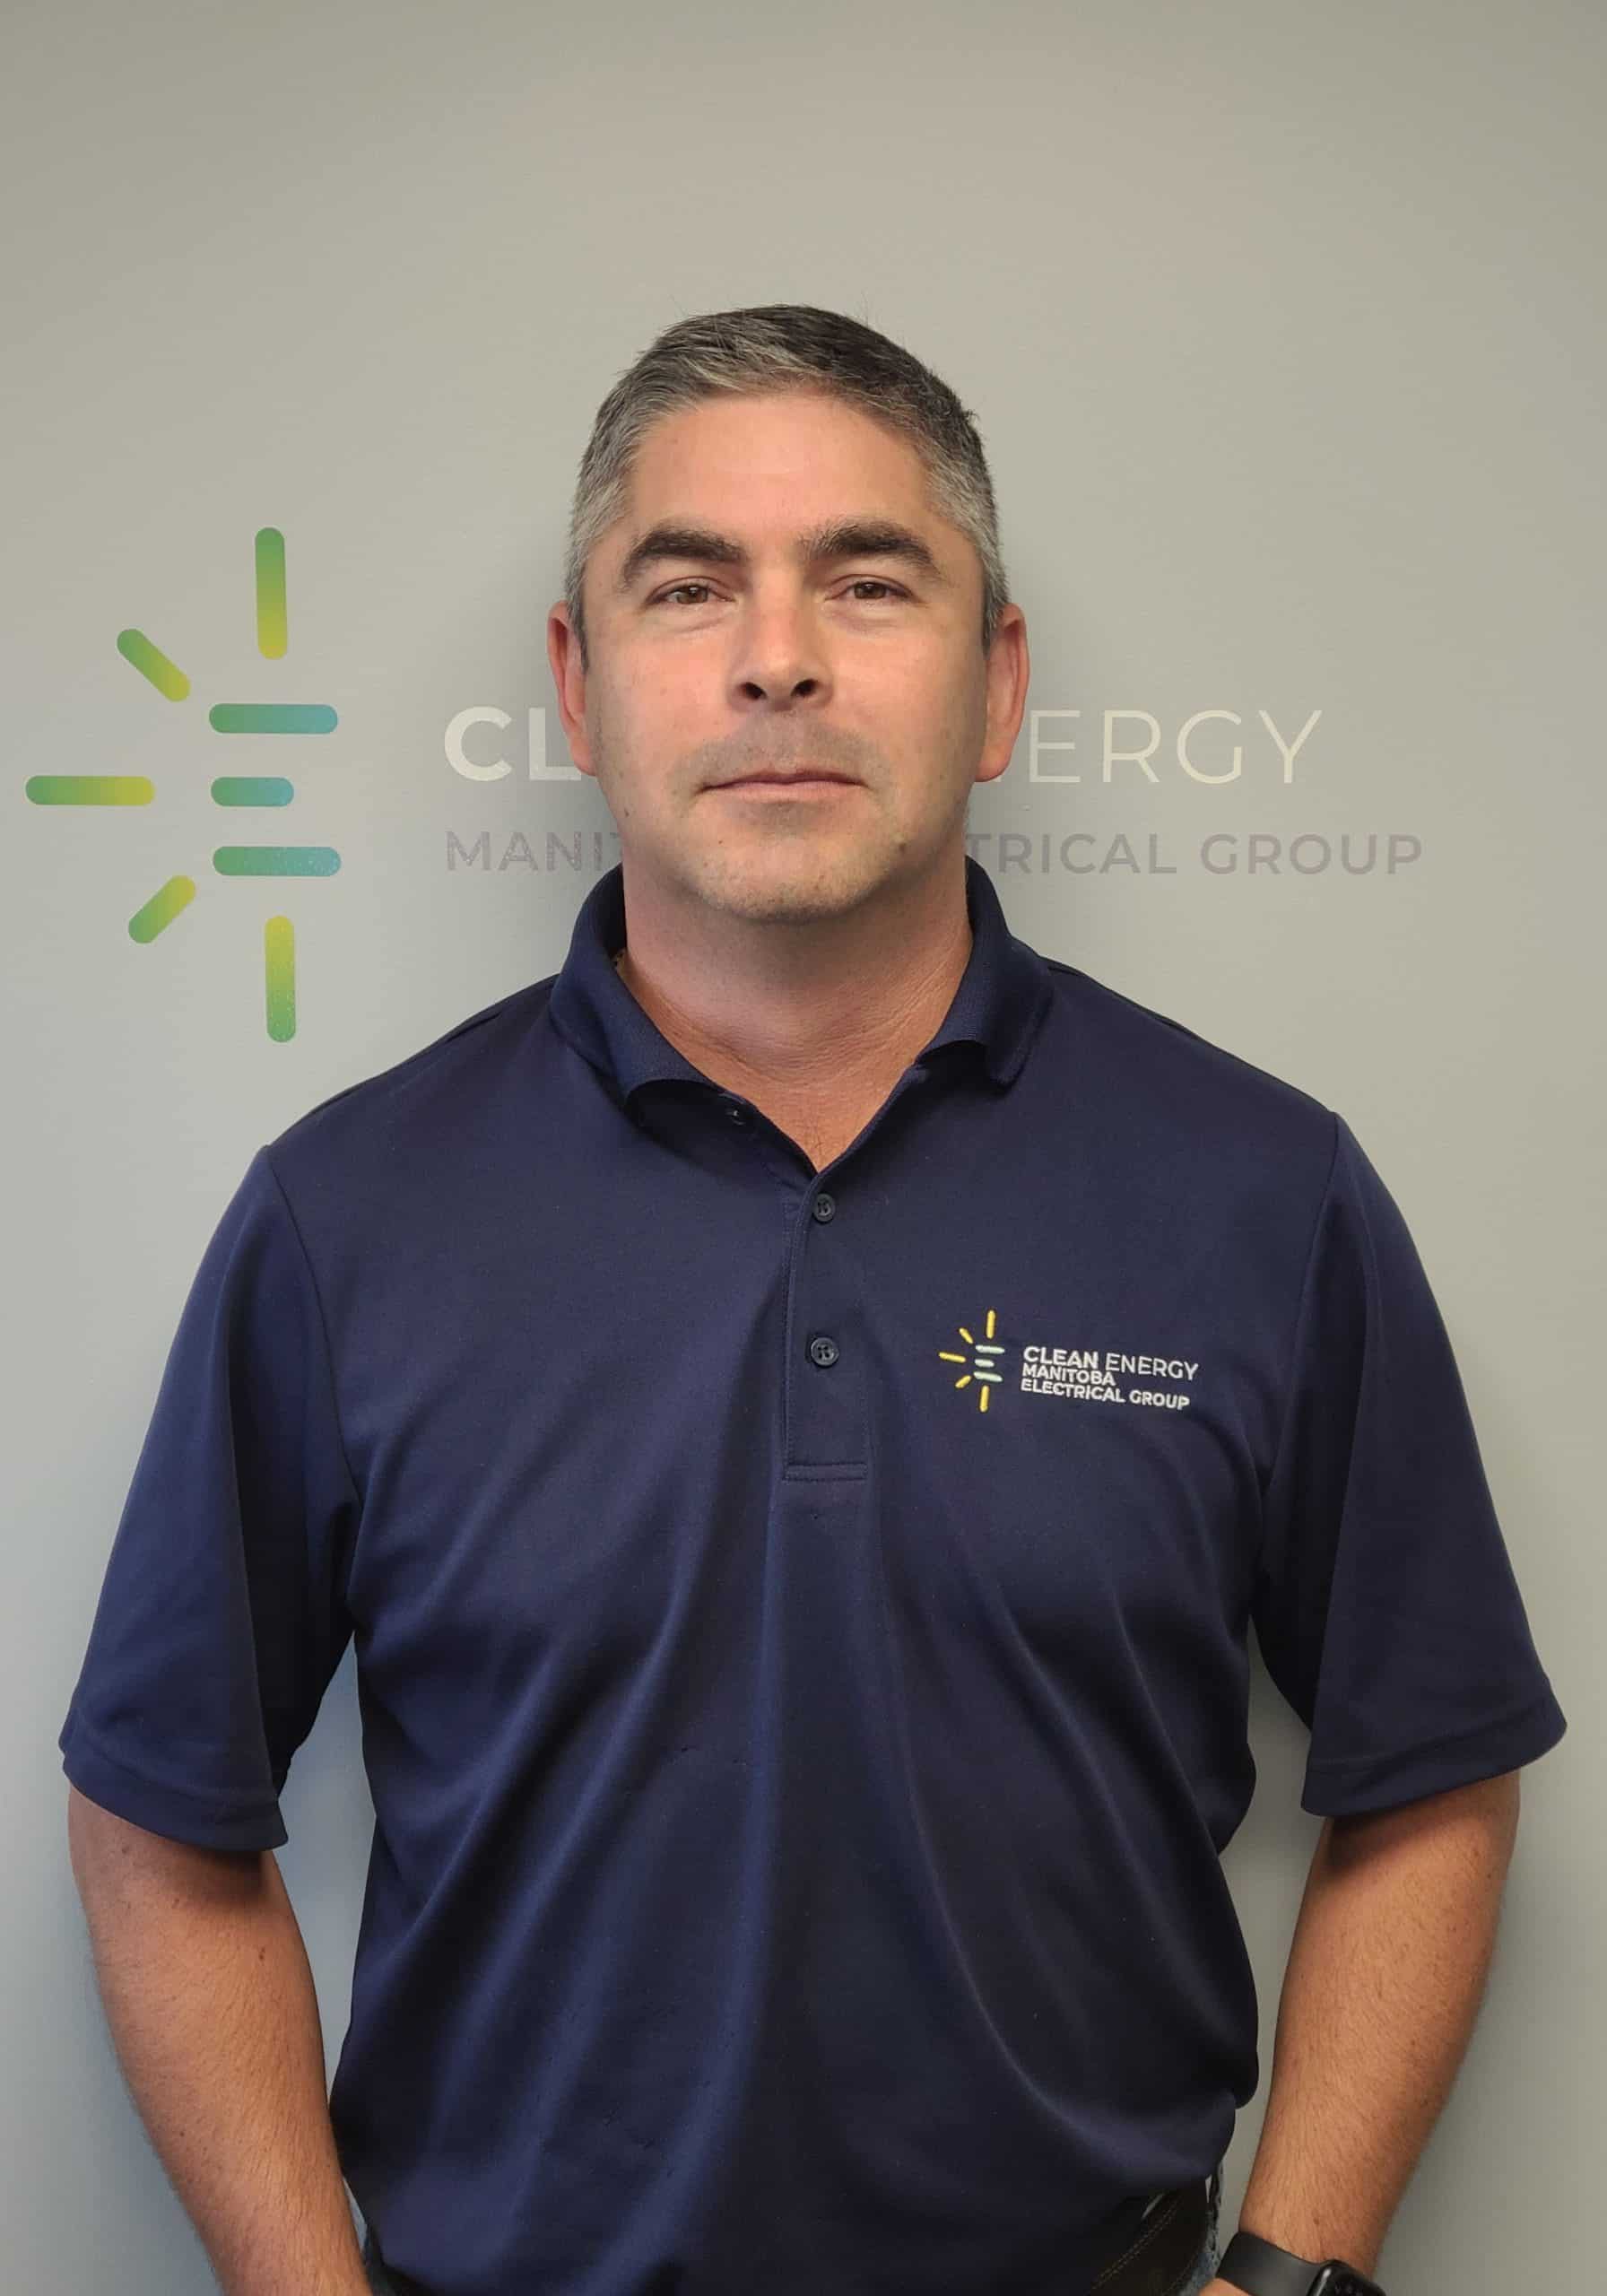 About Us | Randy Thorsteinson - Clean Energy Manitoba Electrical Group Ltd.